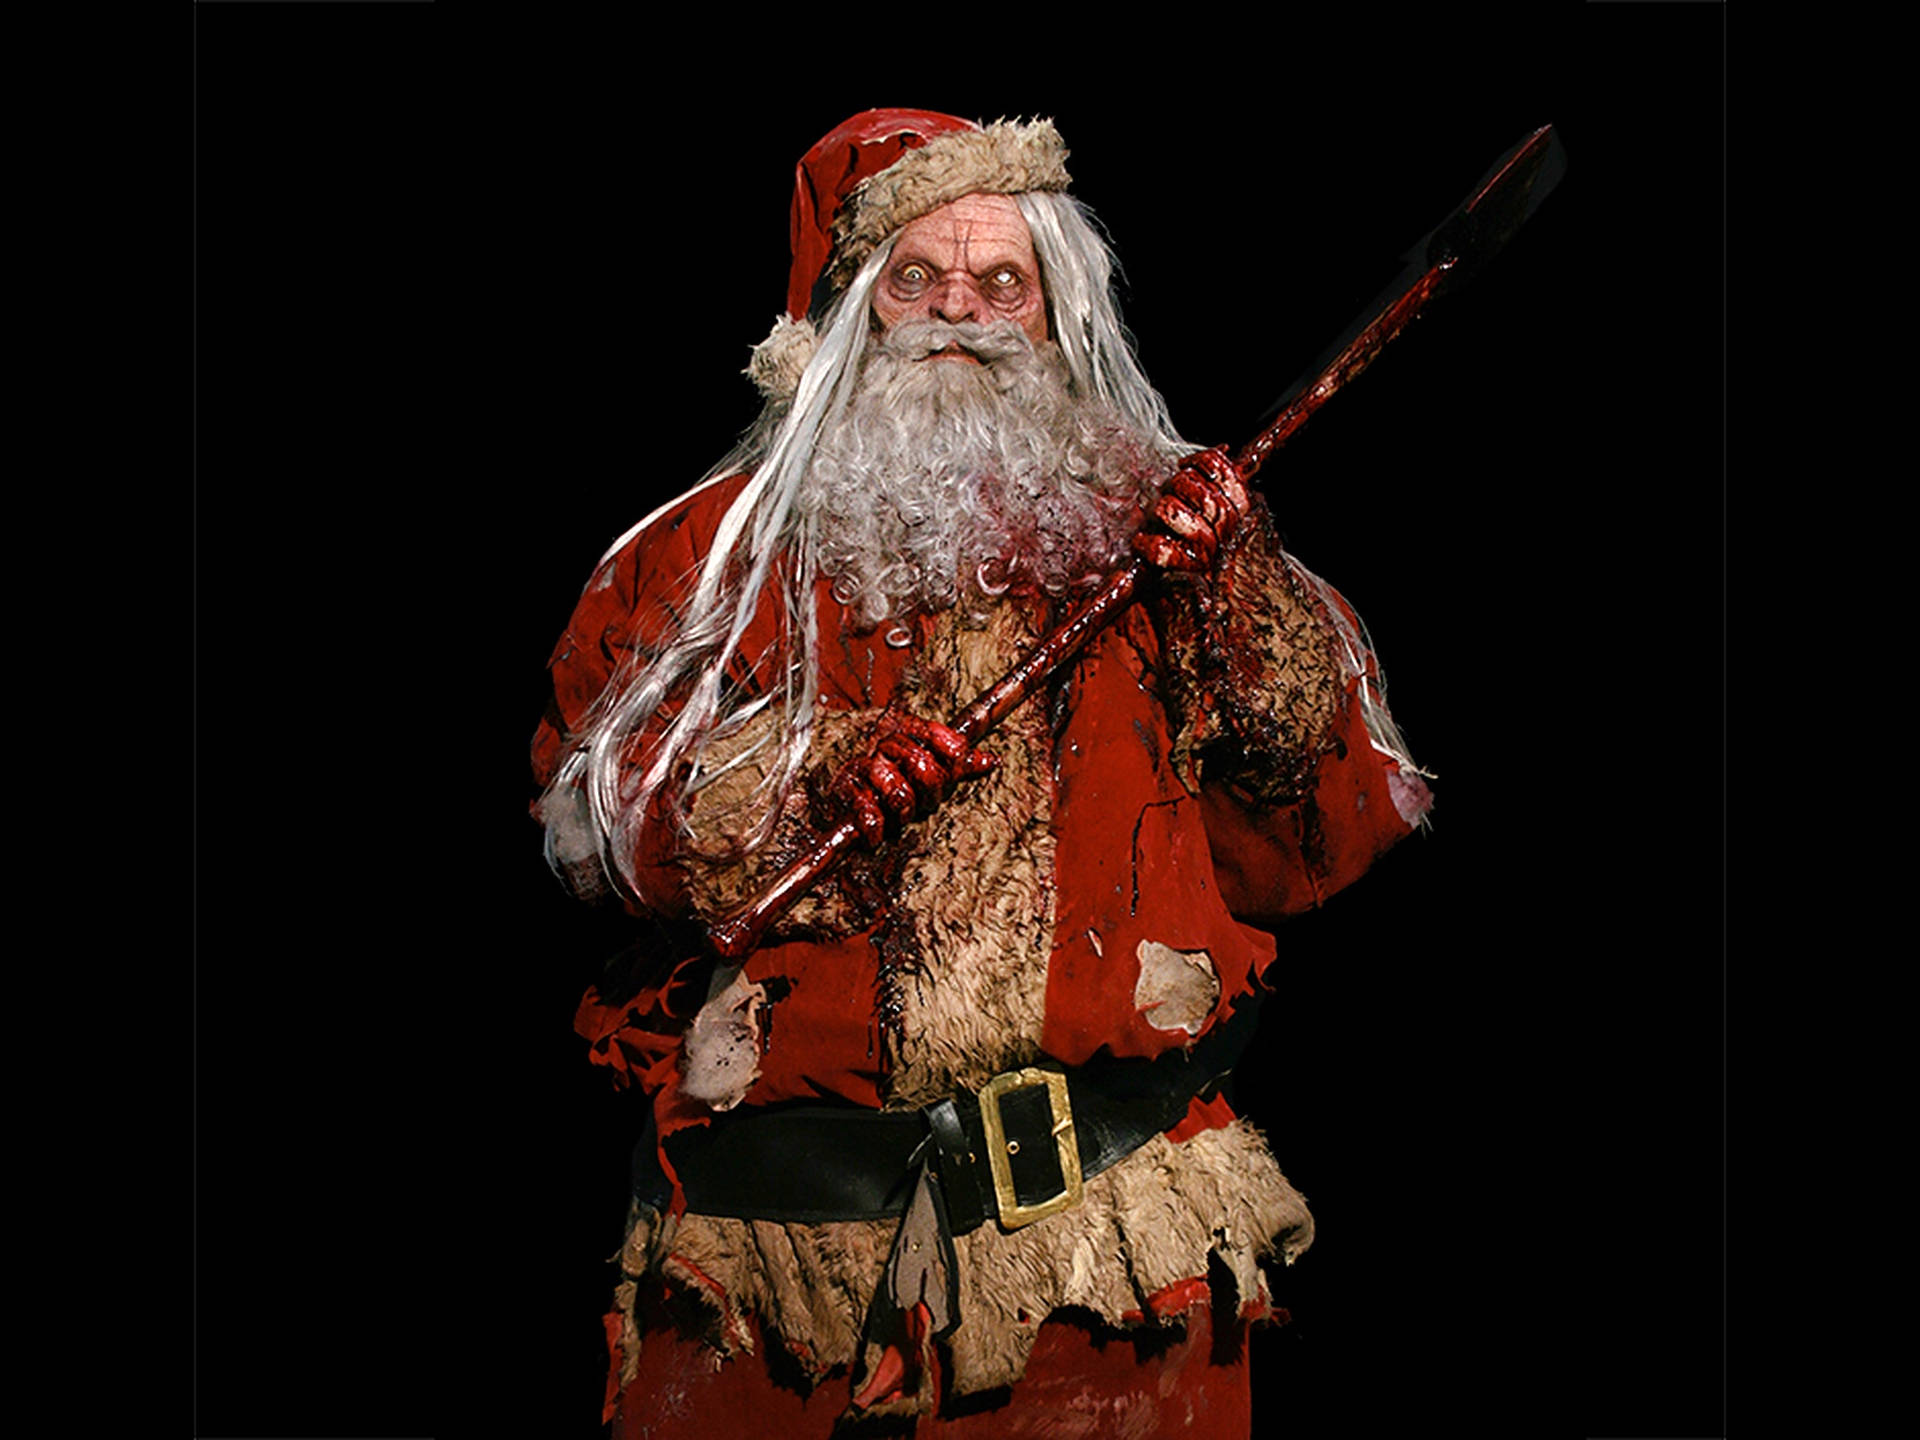 Evil Santa Bloodstained Ax Background